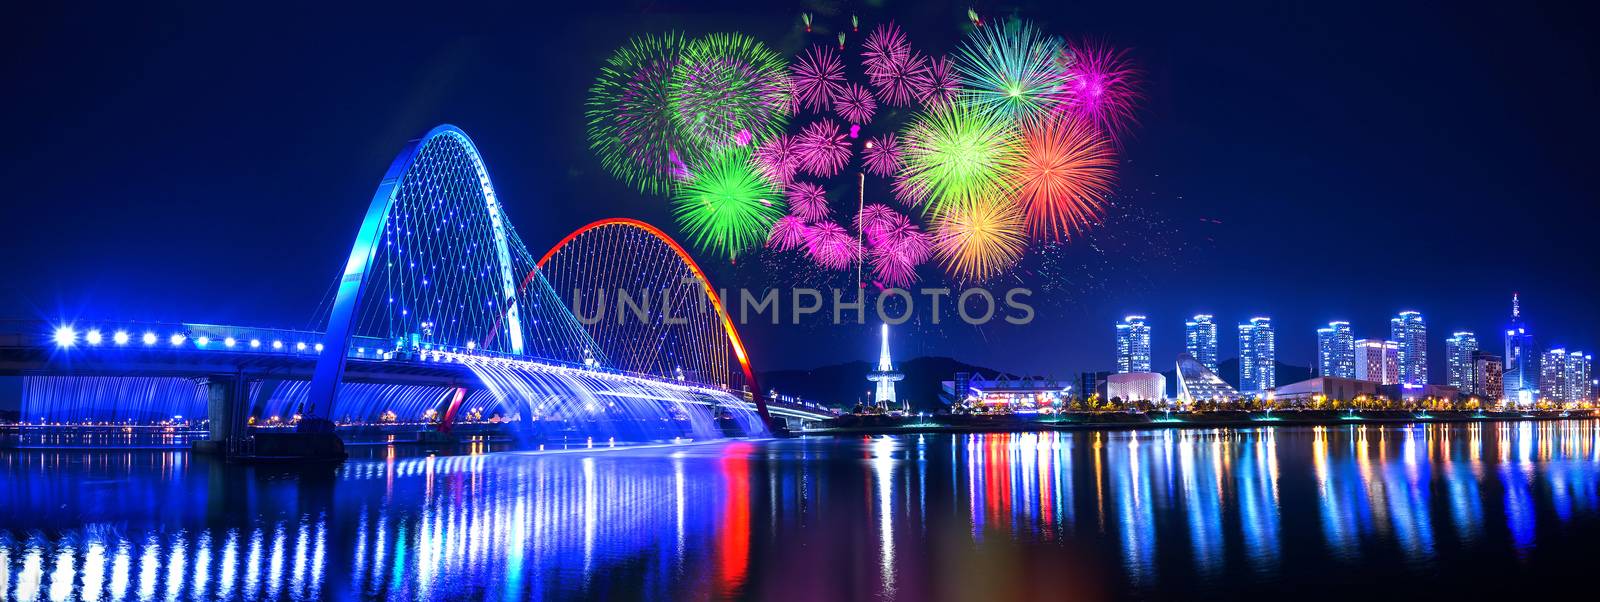 Rainbow fountain show at Expo Bridge and firework festival in Daejeon,South Korea. by gutarphotoghaphy